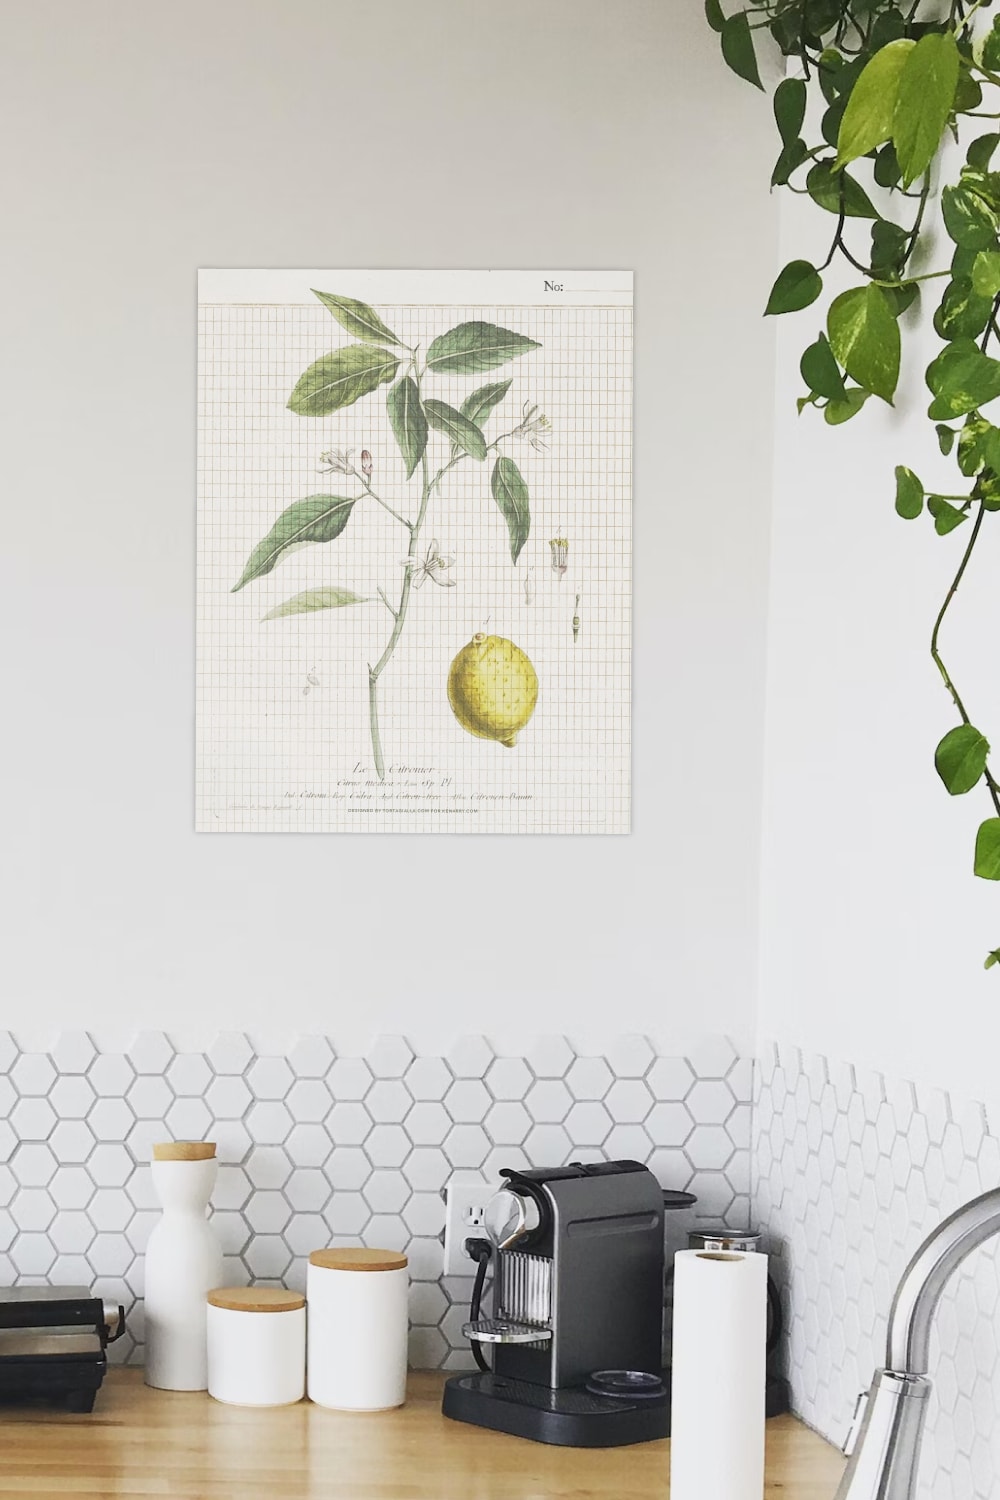 Preview of lemon vintage botanical style art print on white kitchen wall above countertop with coffee machine and white containers with view of hanging ivy on right side.